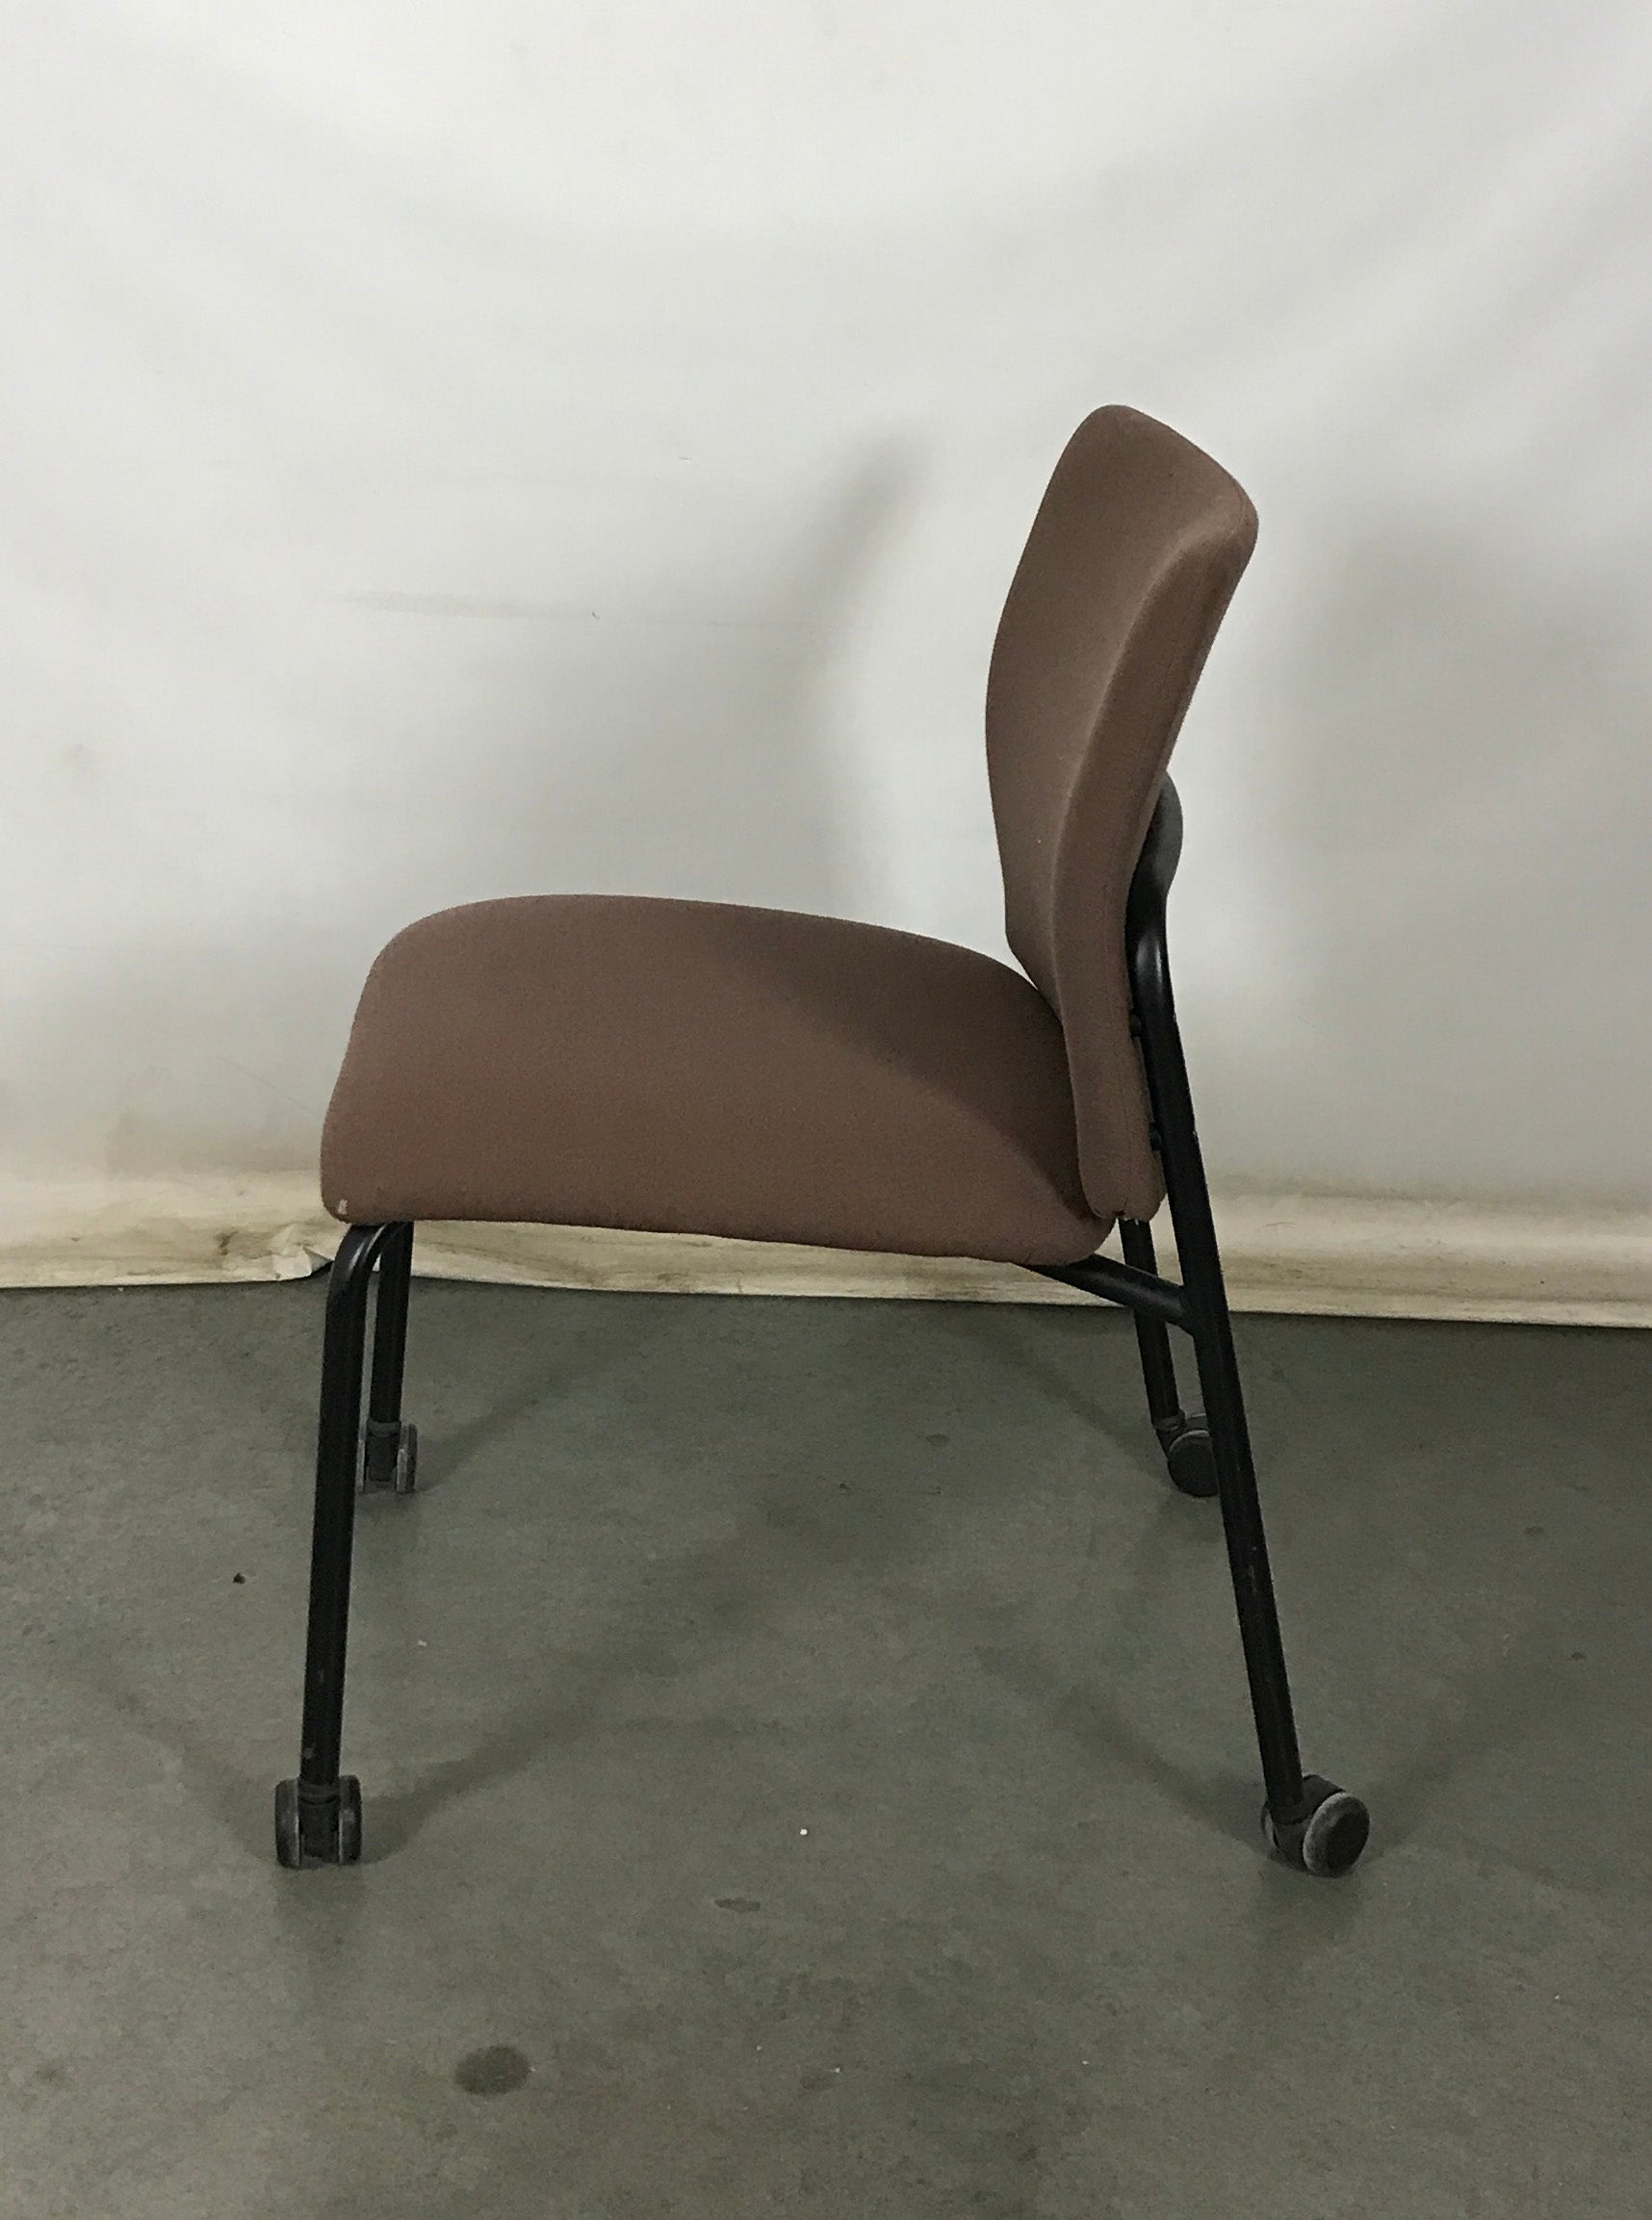 Turnstone Brown Rolling Chair